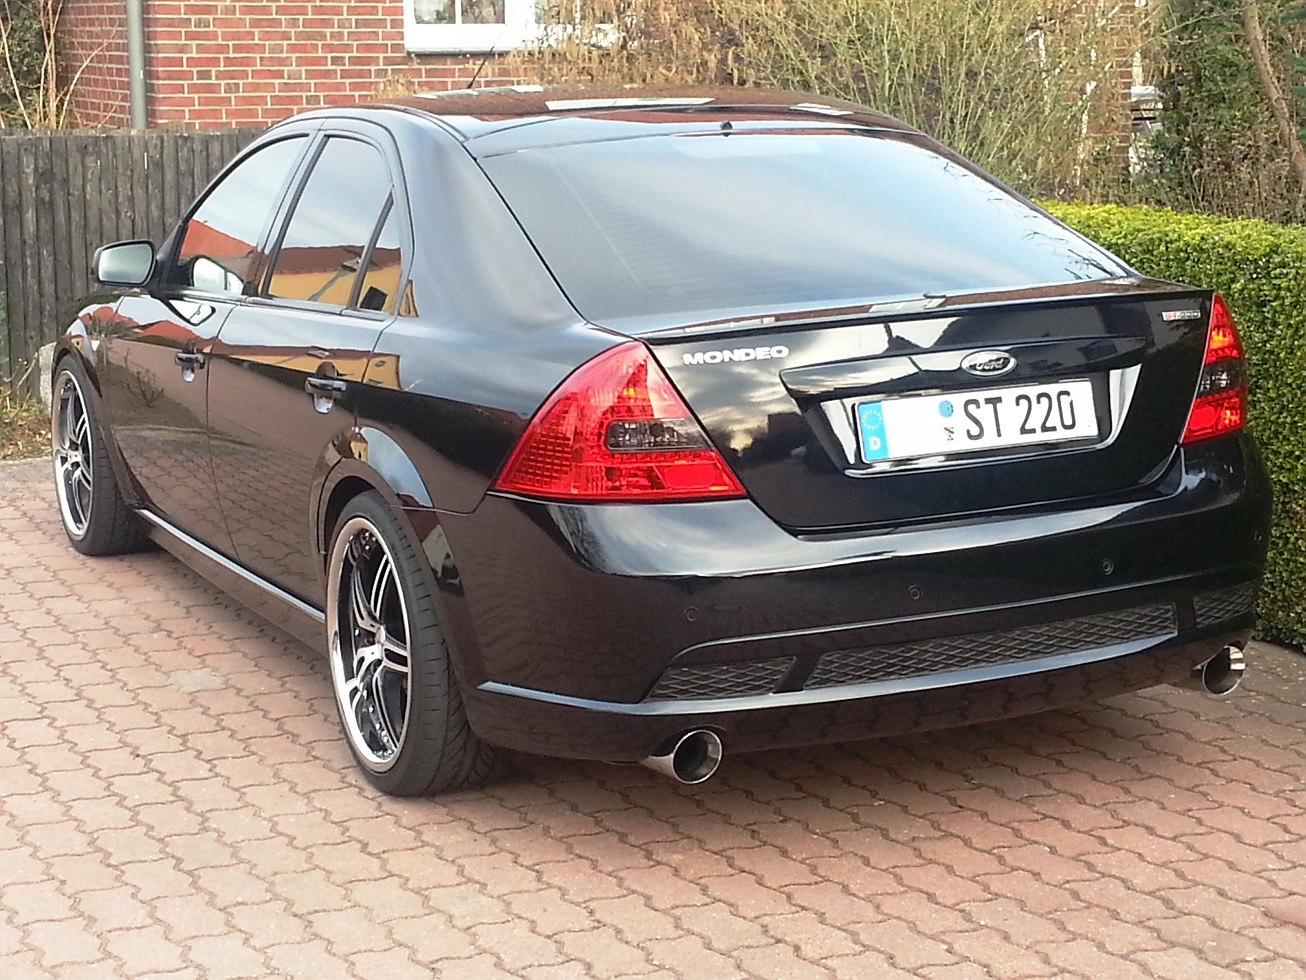 Ford mondeo st220 engine tuning